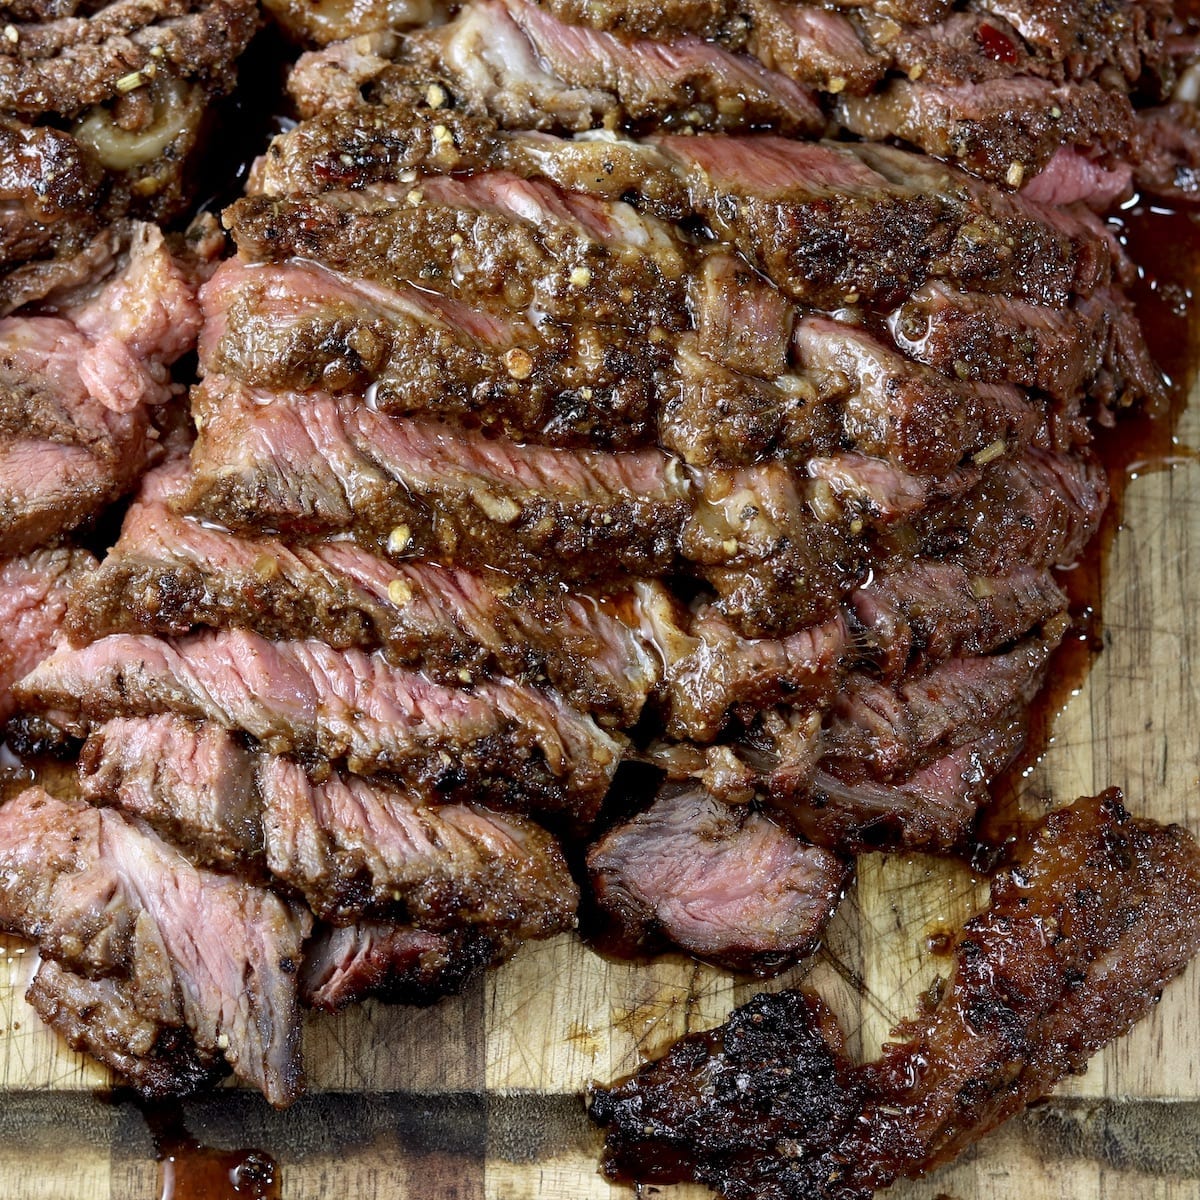 Sliced roast beef that has been marinated and grilled